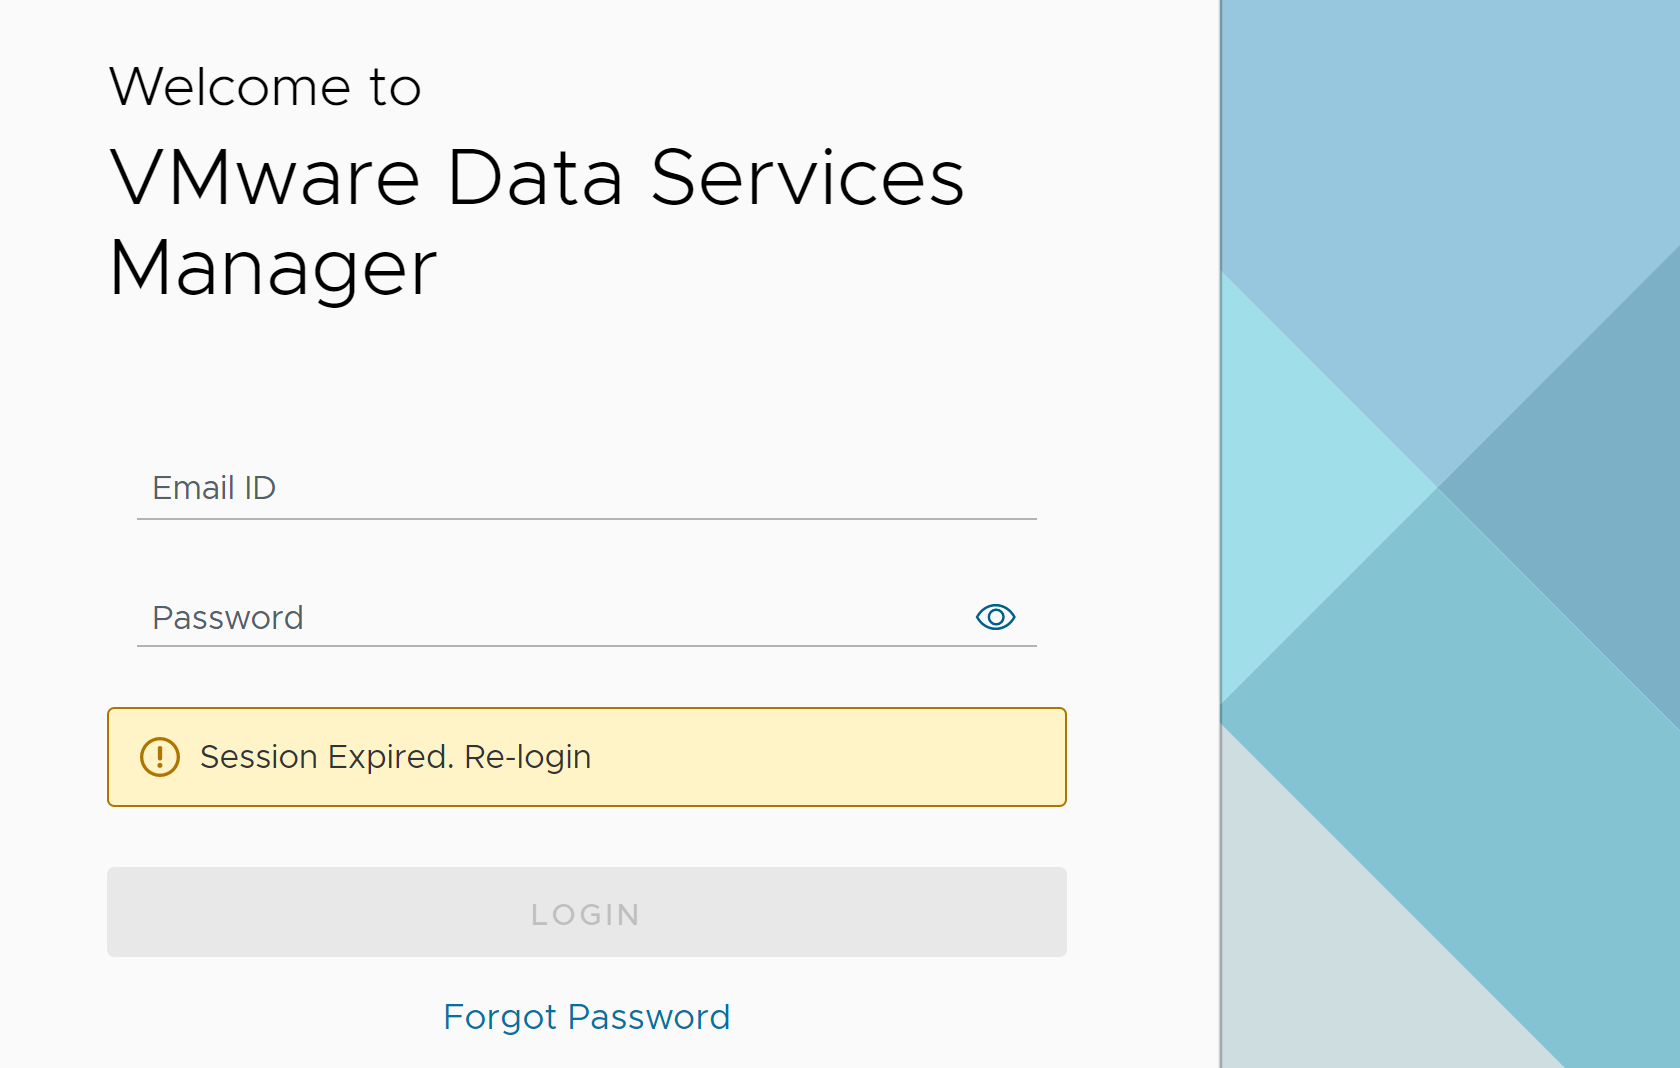 Login Screen of VMware Data Services Manager